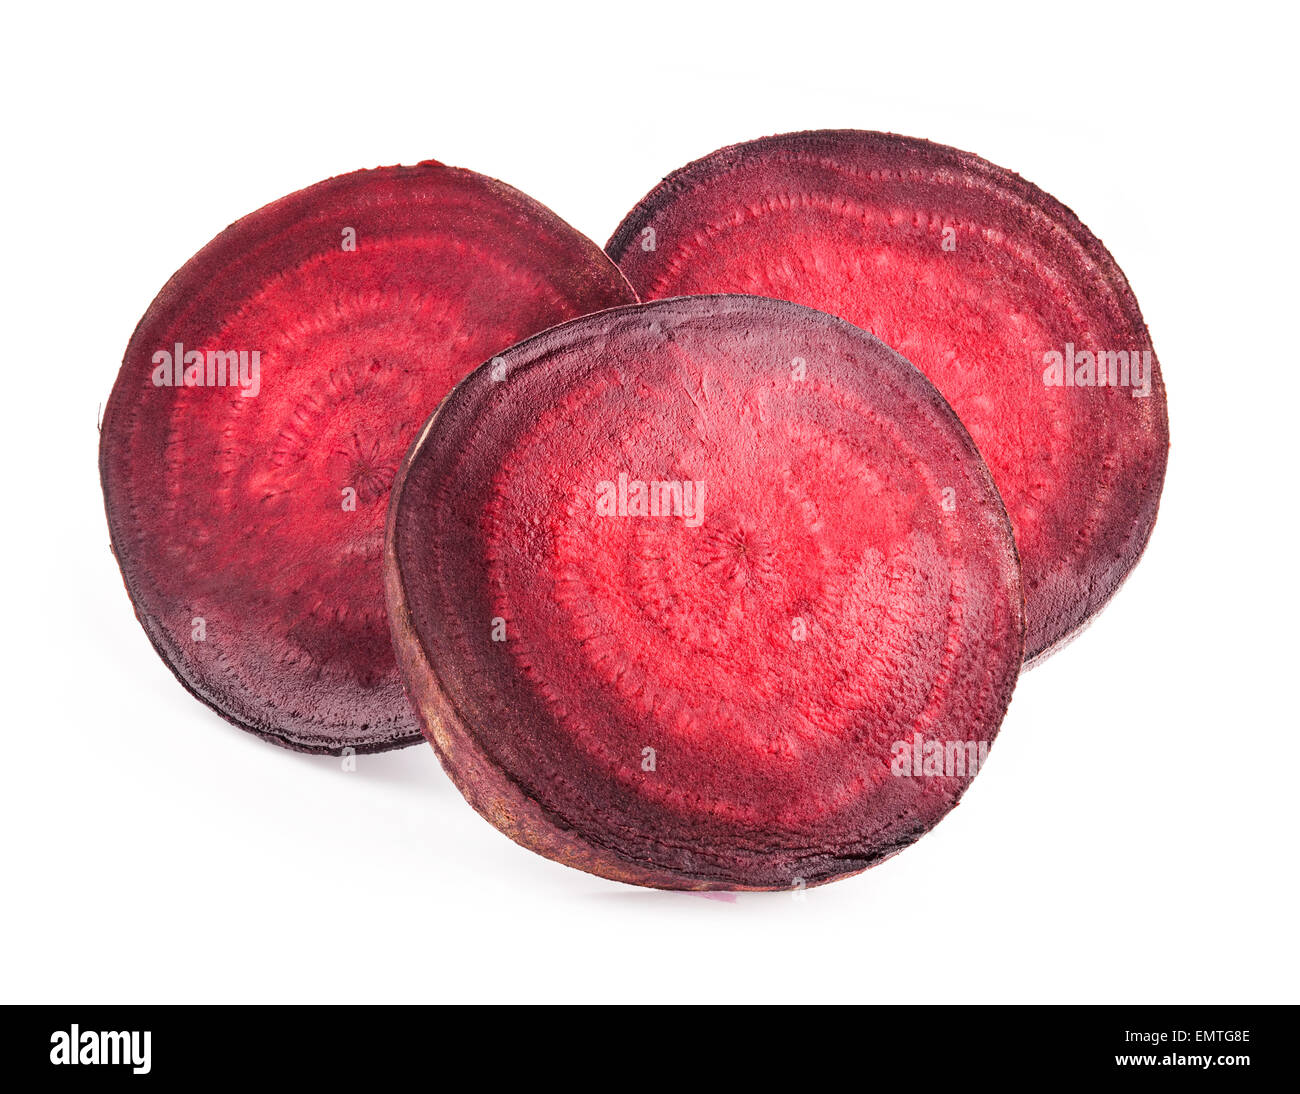 Red beets slices isolated on white background Stock Photo